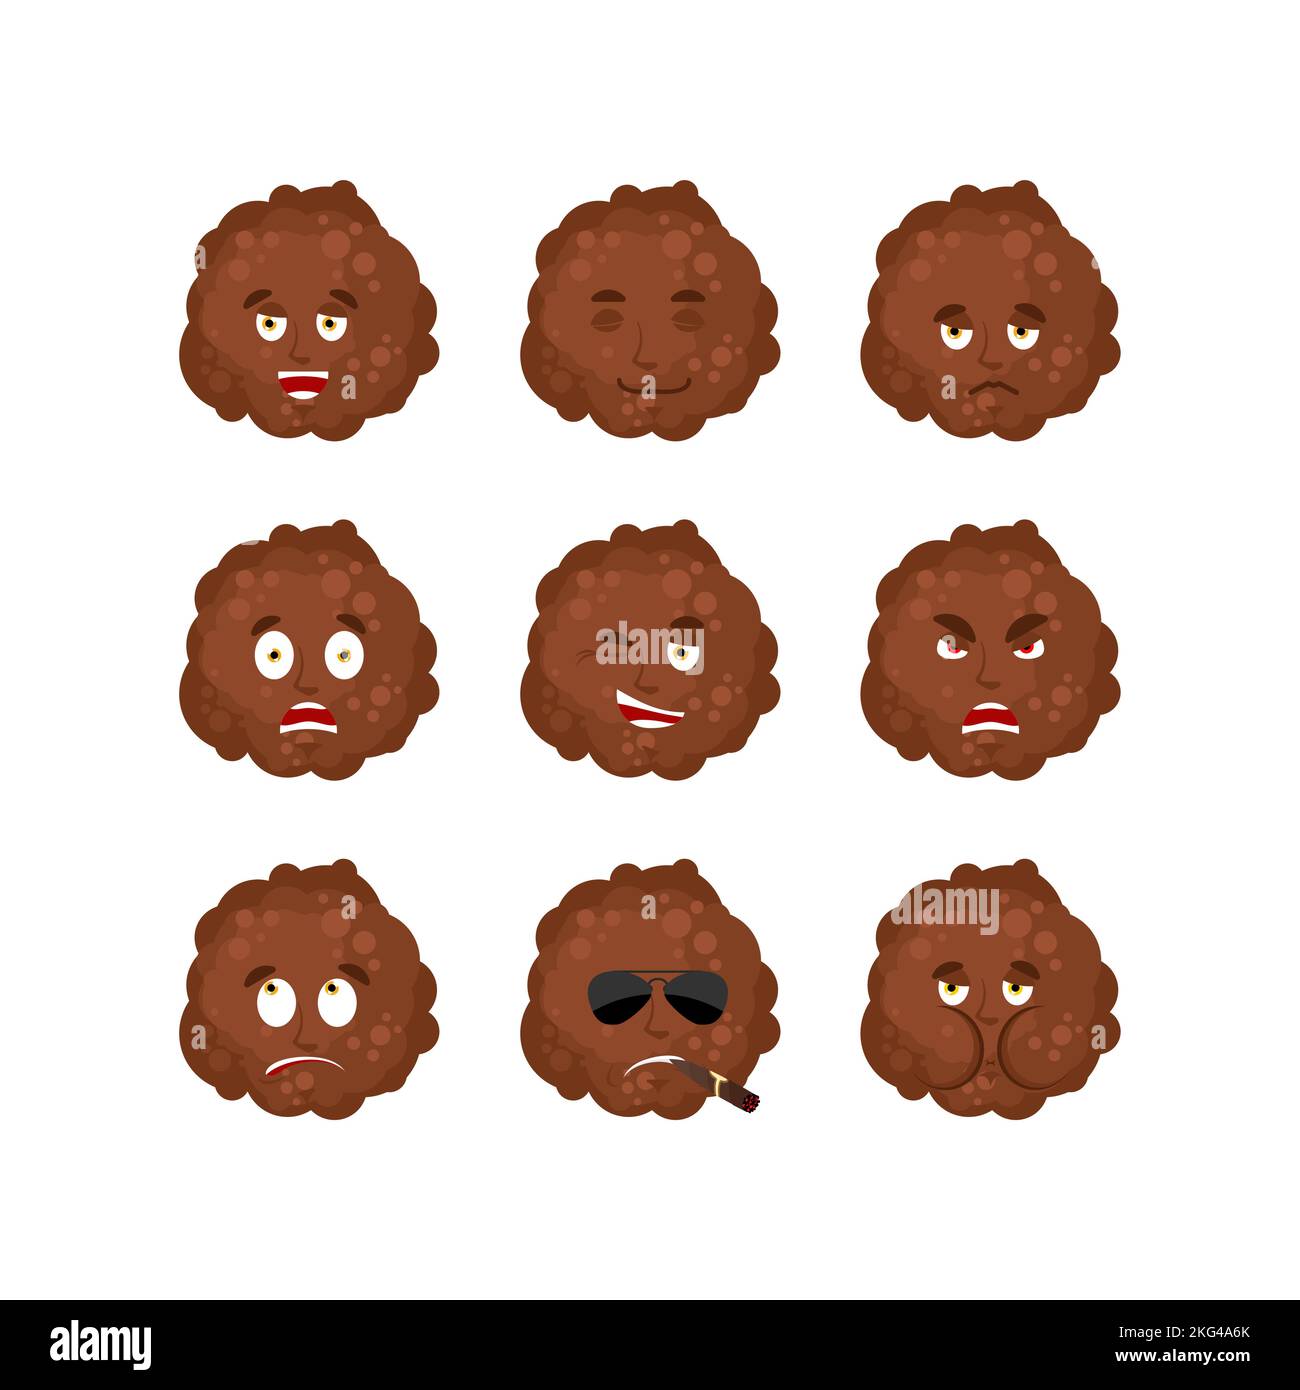 Meatball set emotion avatar. sad and angry face. guilty and sleeping. ball of meat sleeping emoji face. Vector illustration Stock Vector